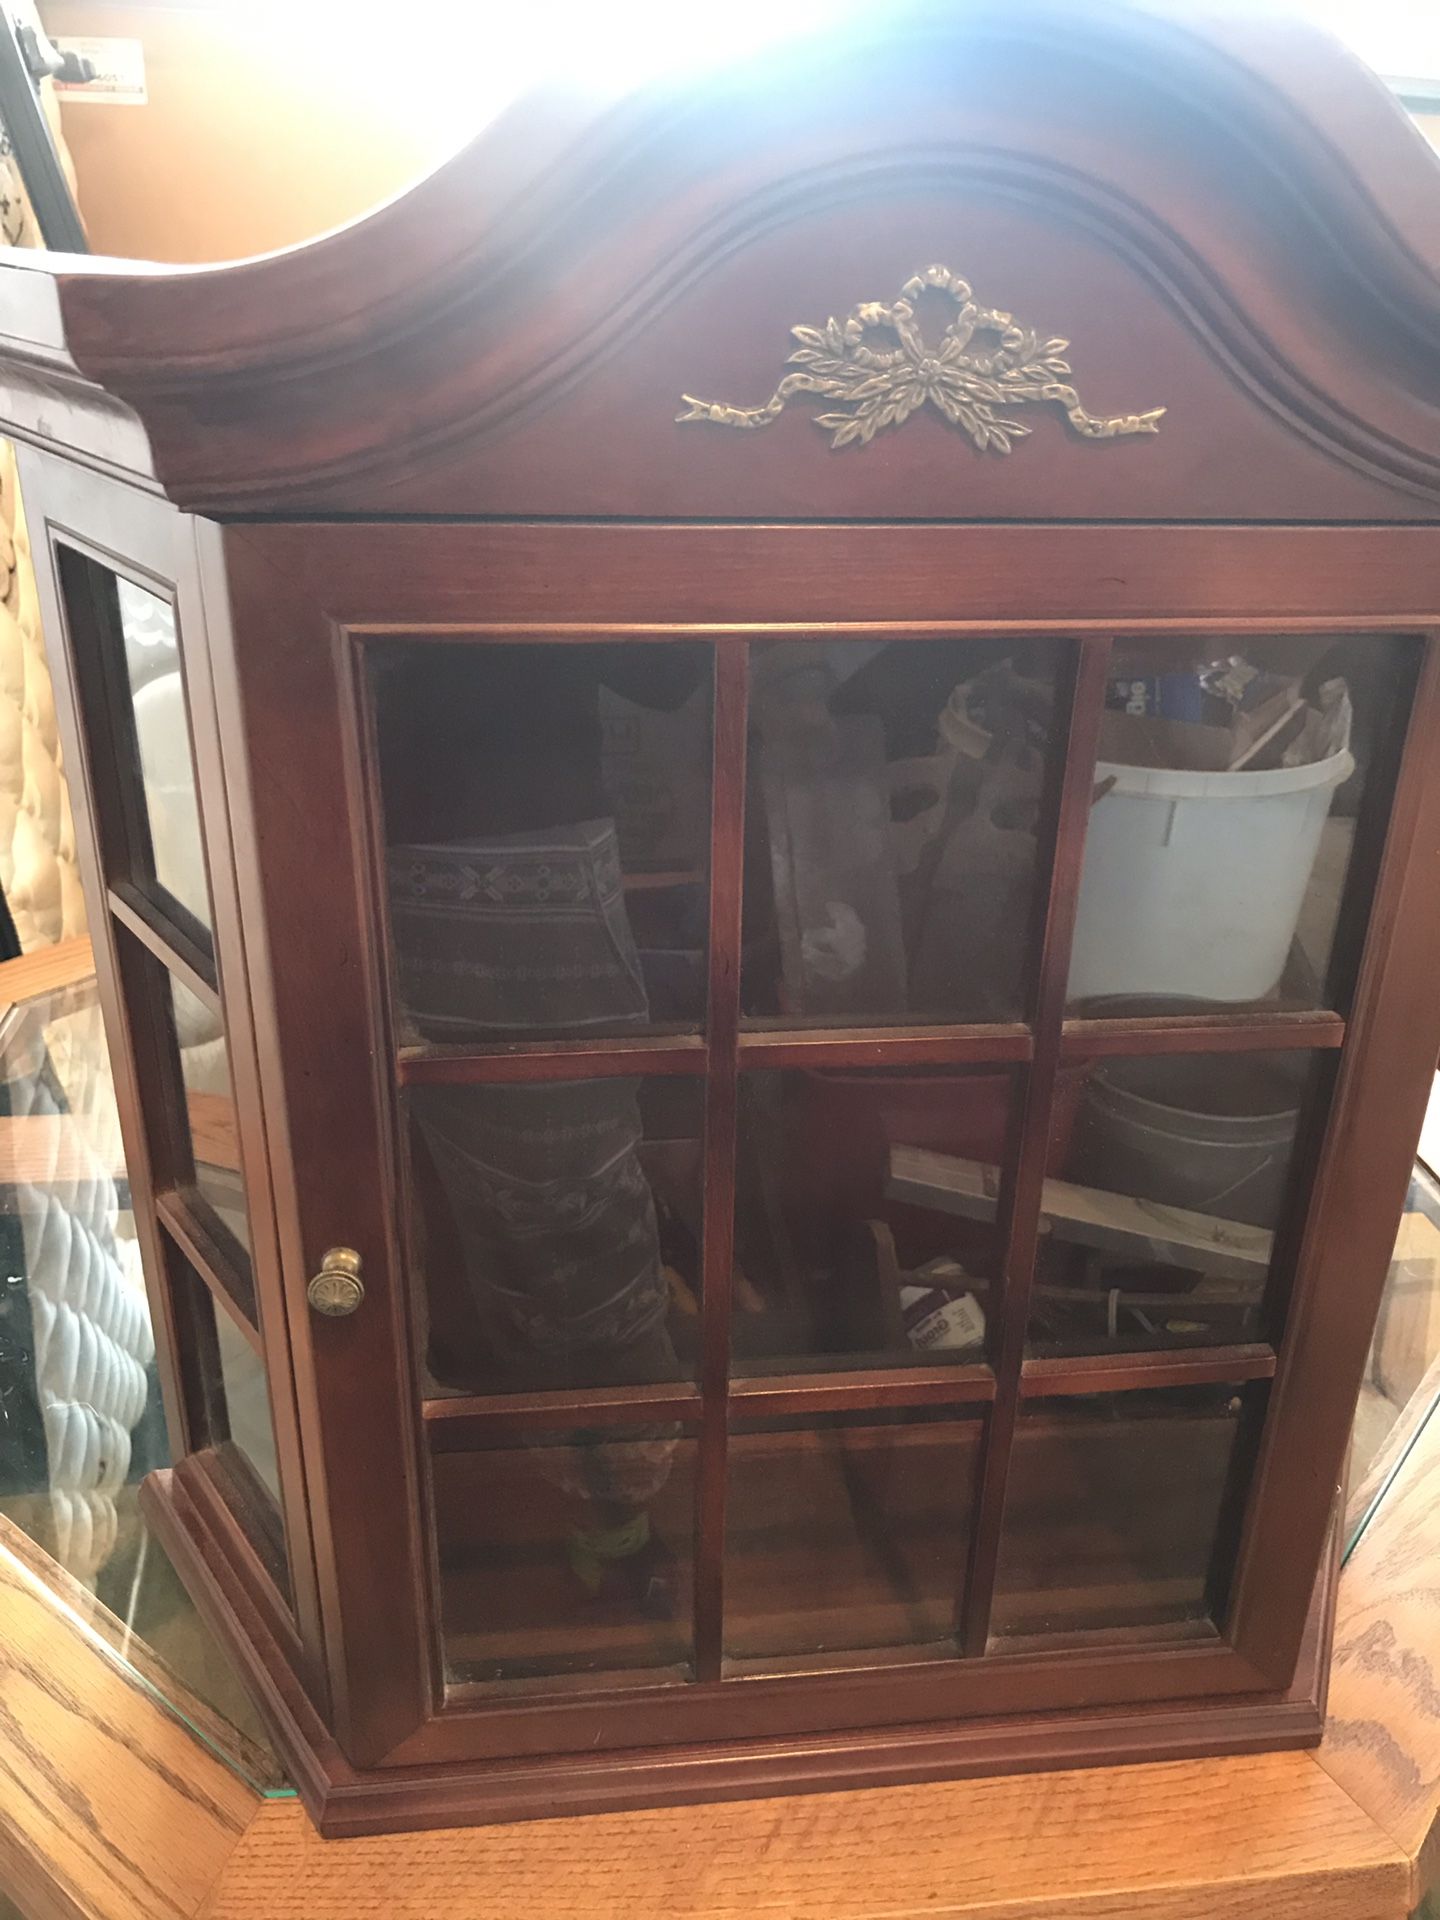 Antique wooden glass cabinet